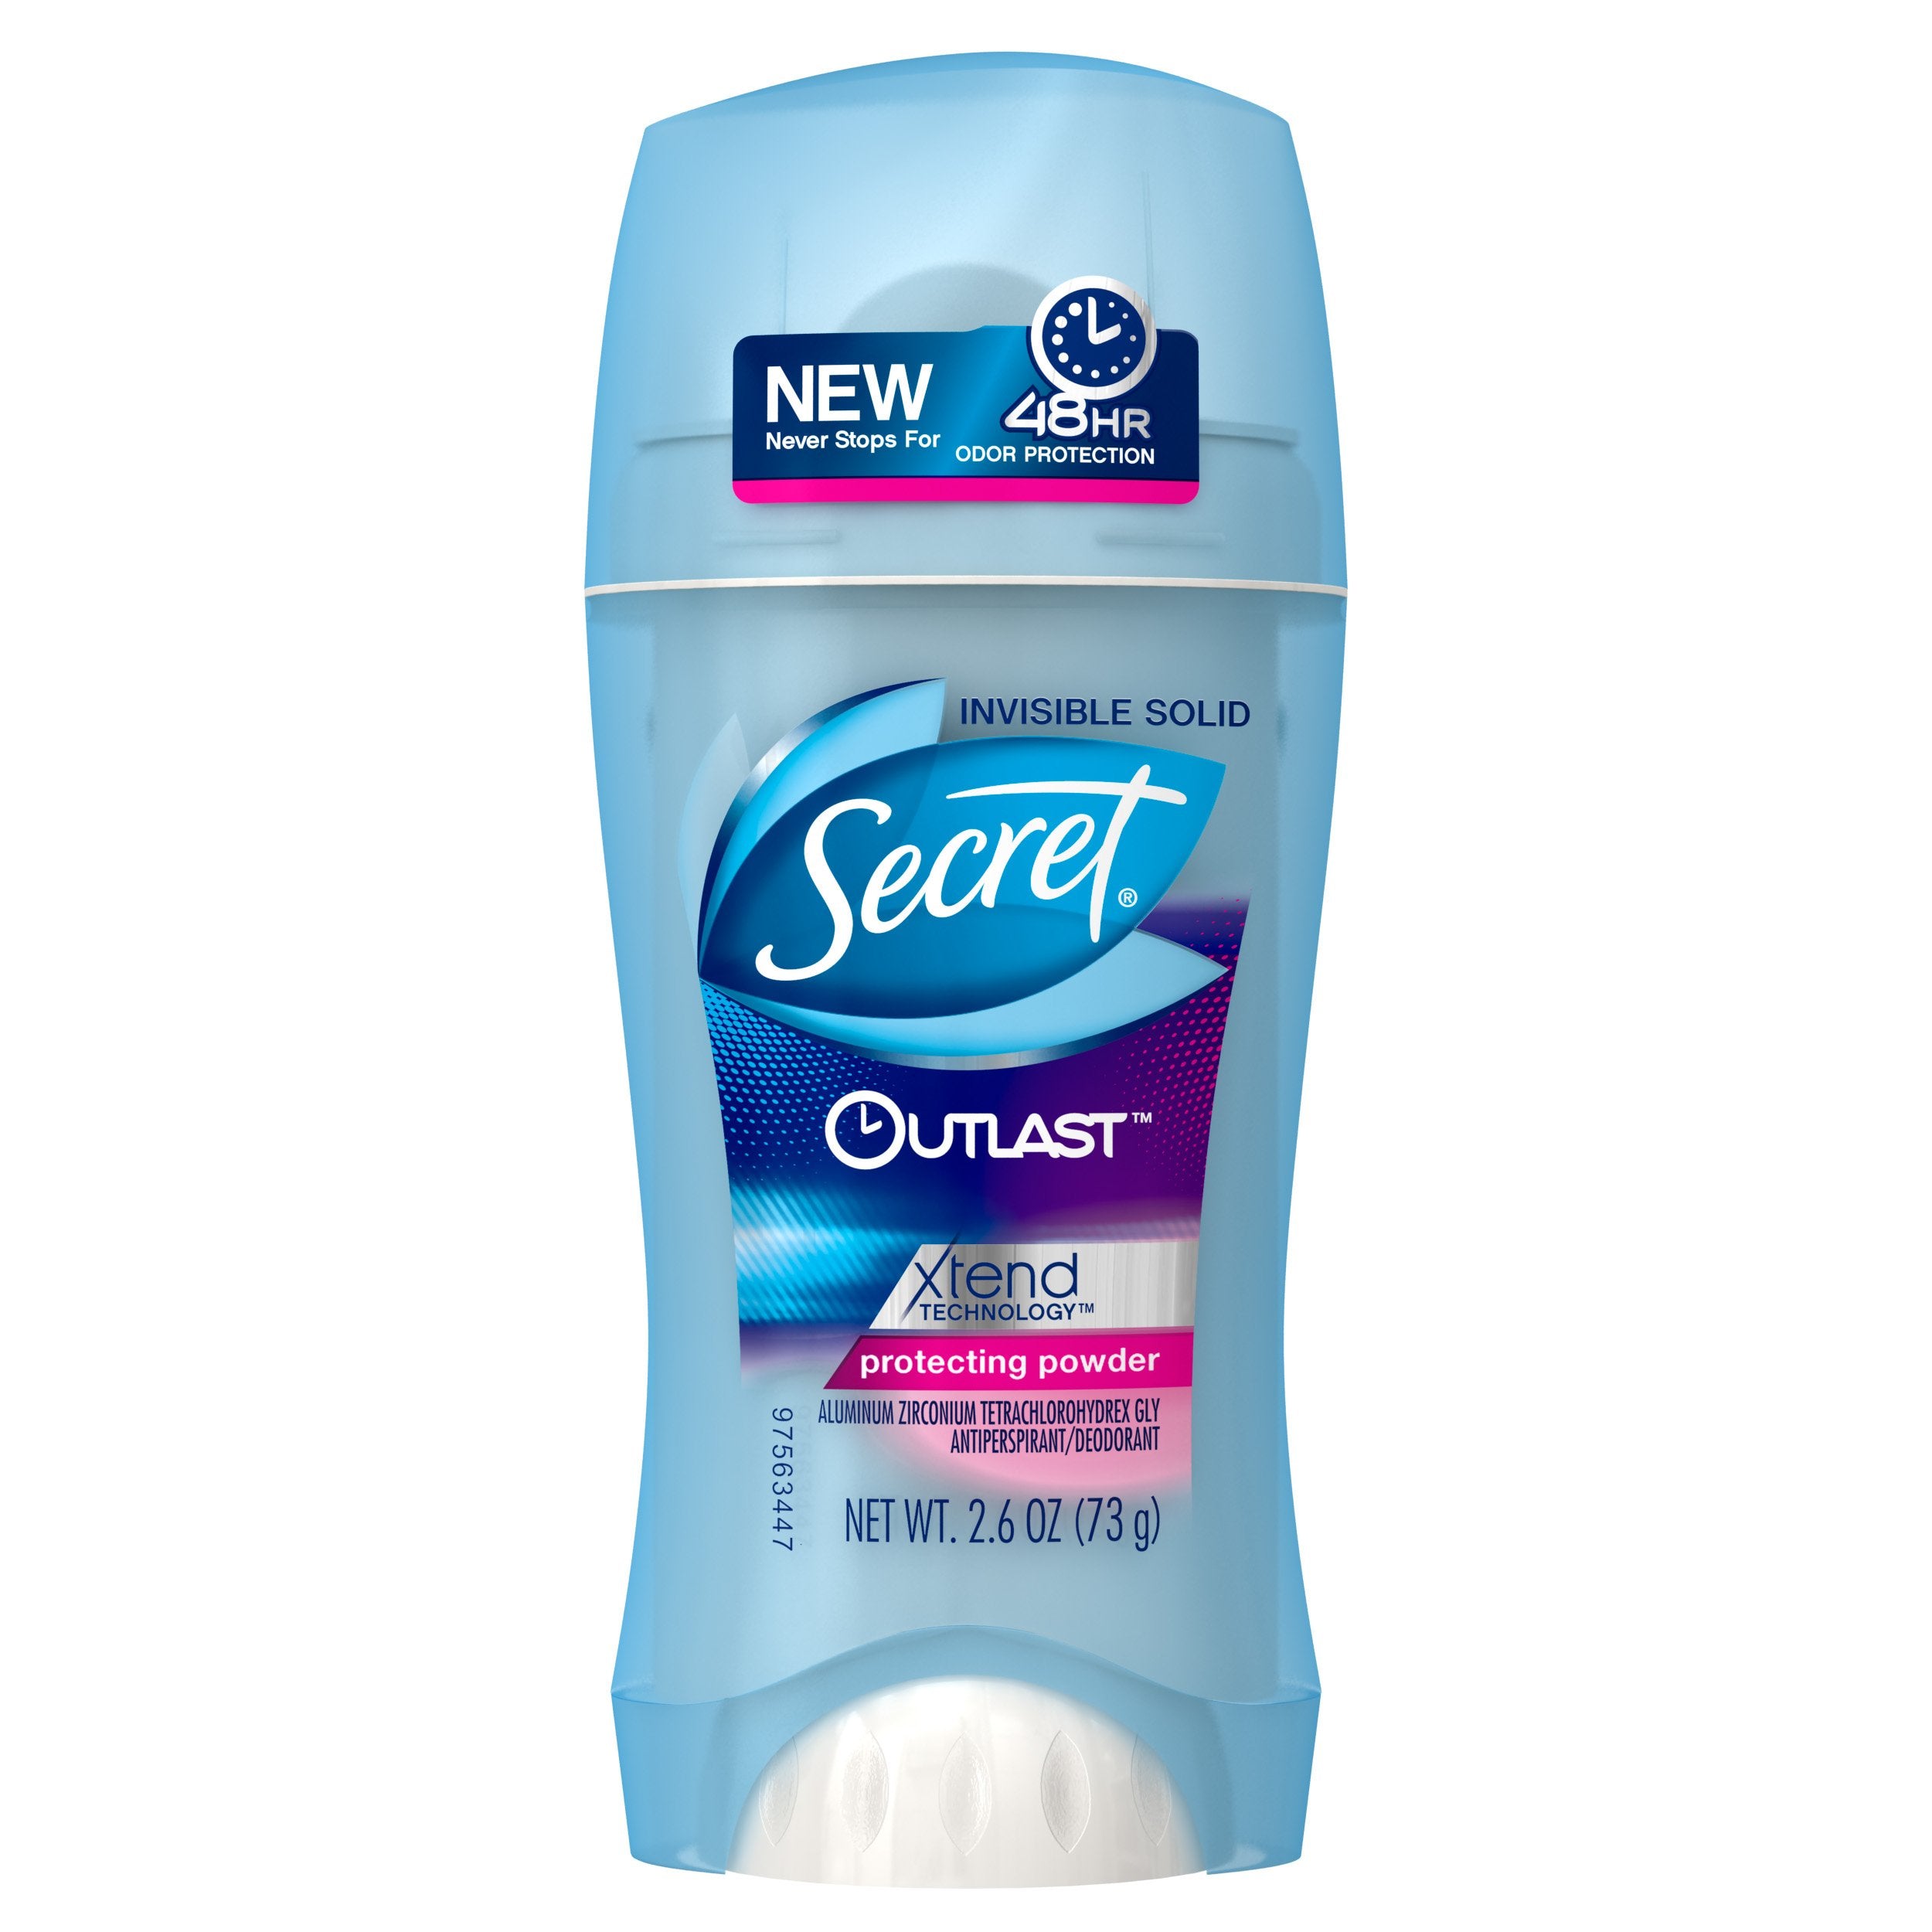 Secret Outlast Invisible Solid Antiperspirant and Deodorant, Protecting Powder Scent, 2.6 Ounce (Pack of 2)